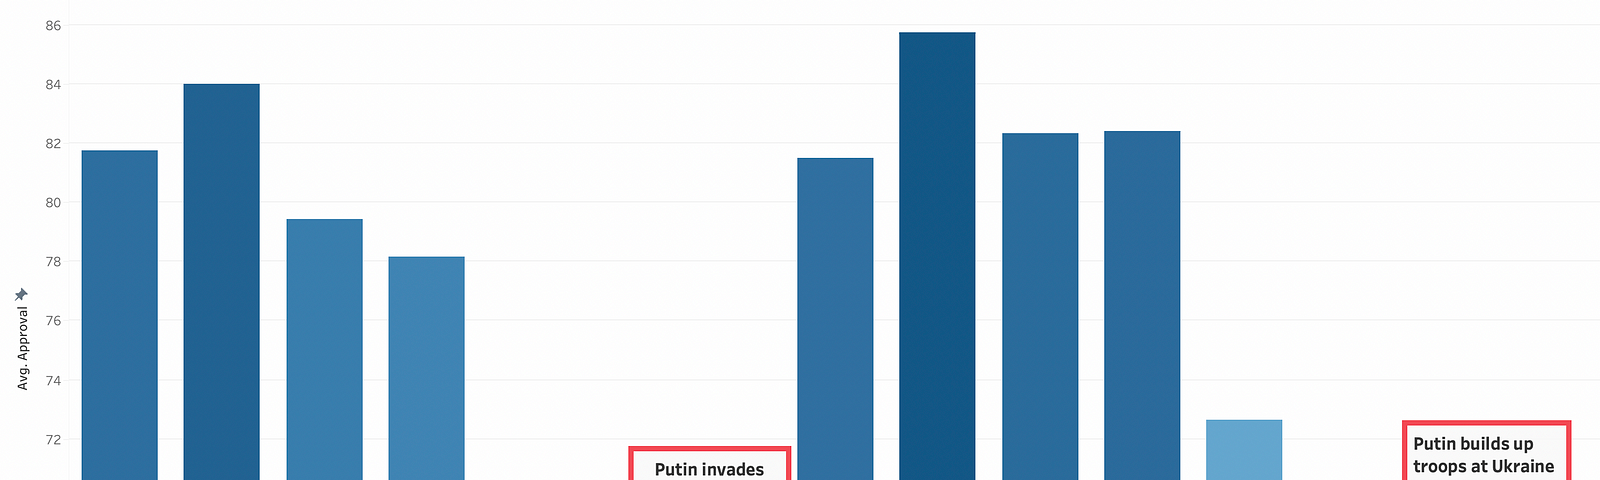 Putin Popularity in graph form